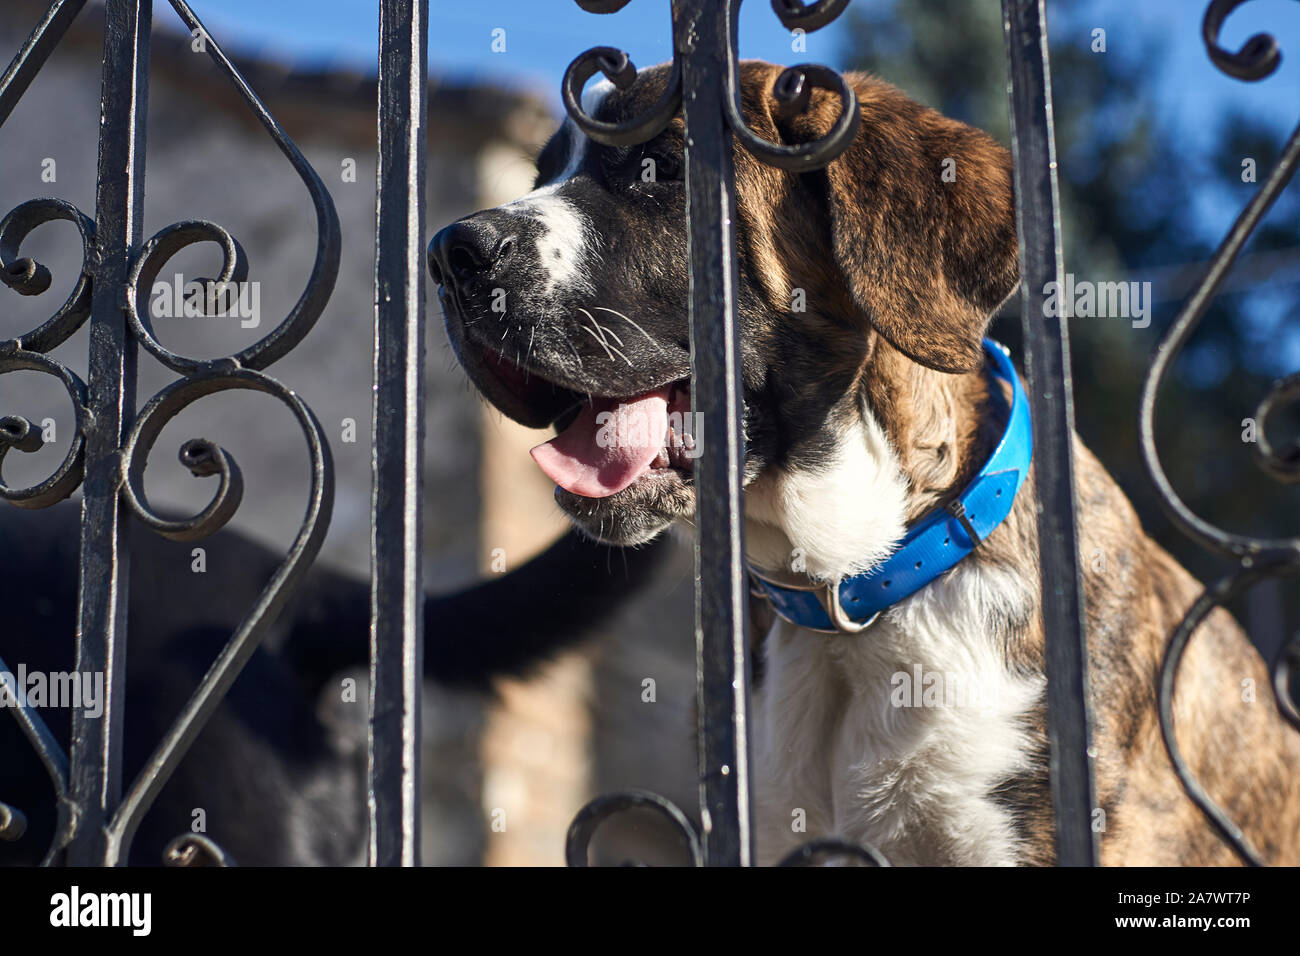 Close-up of Young St Bernard with blue dog collar in old metal fence Stock Photo